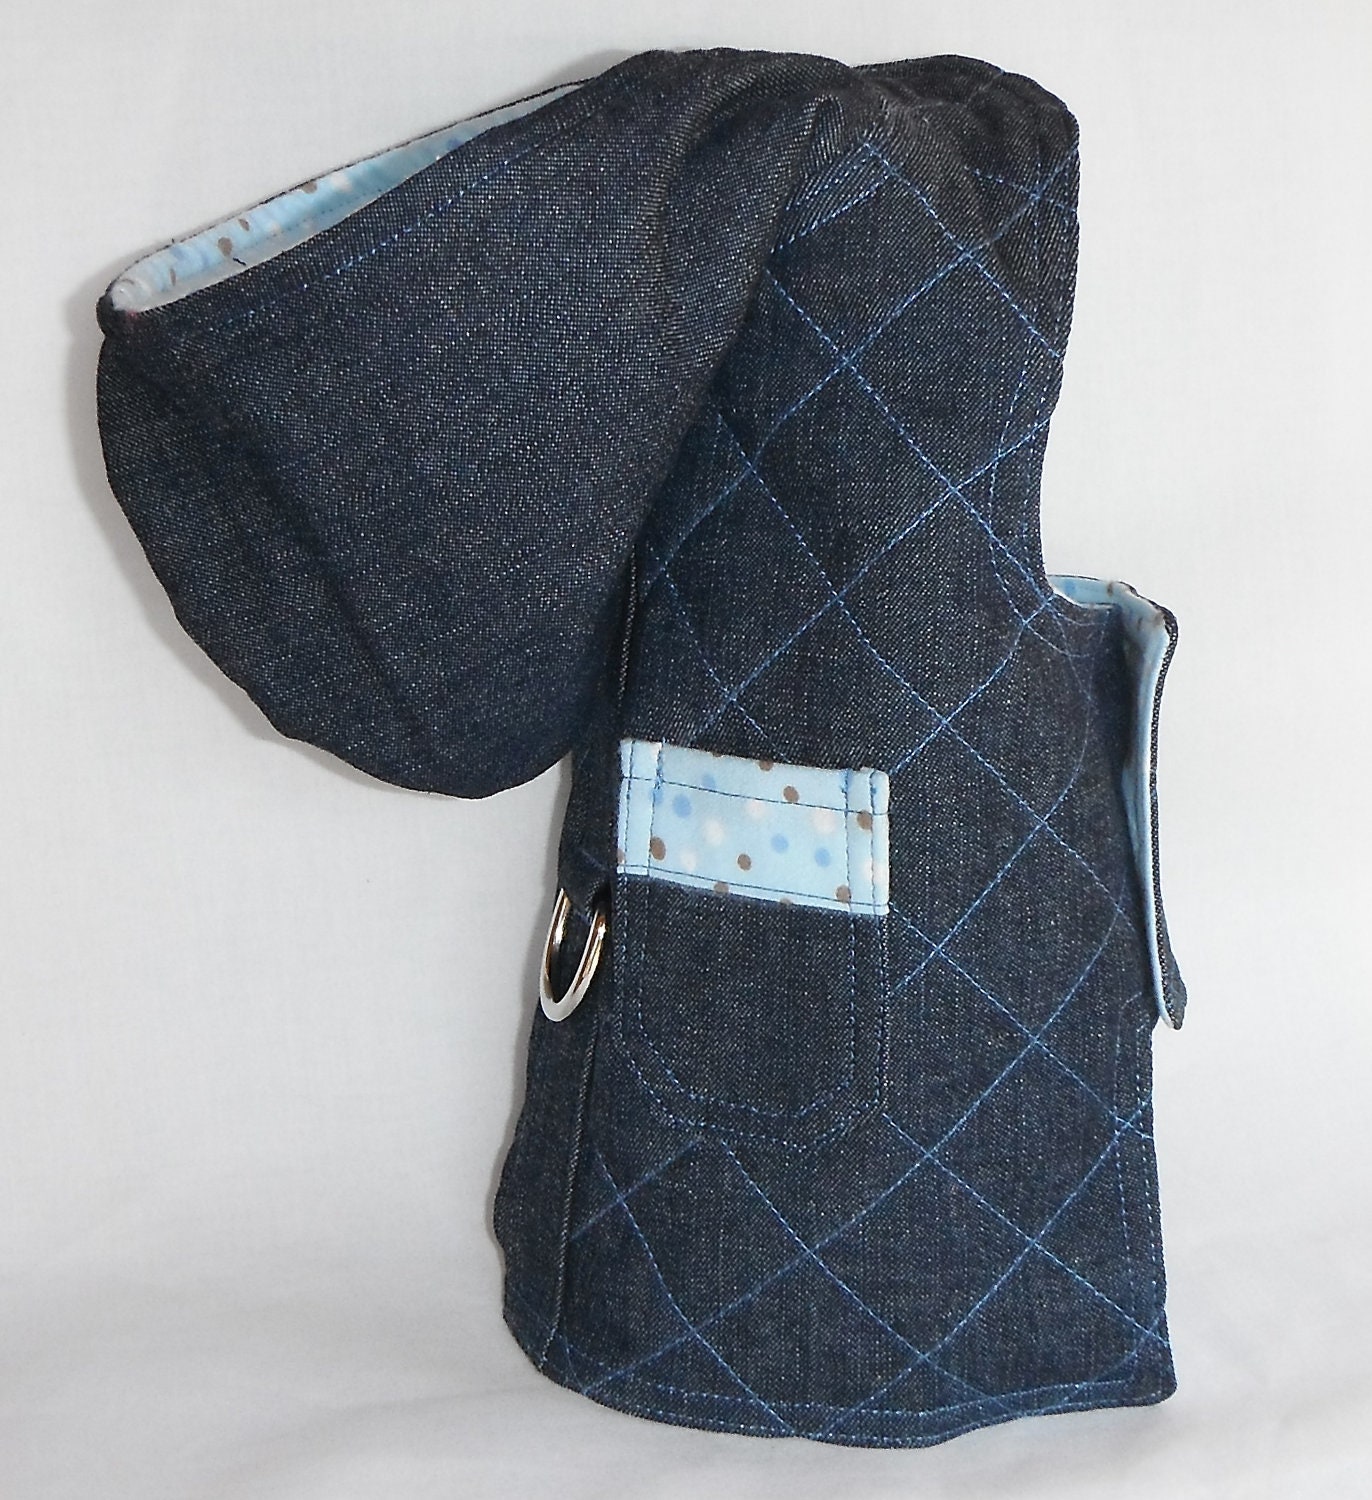 Denim Dog Harness W/Hoodie And Blue Polka by chiwawagearharnesses